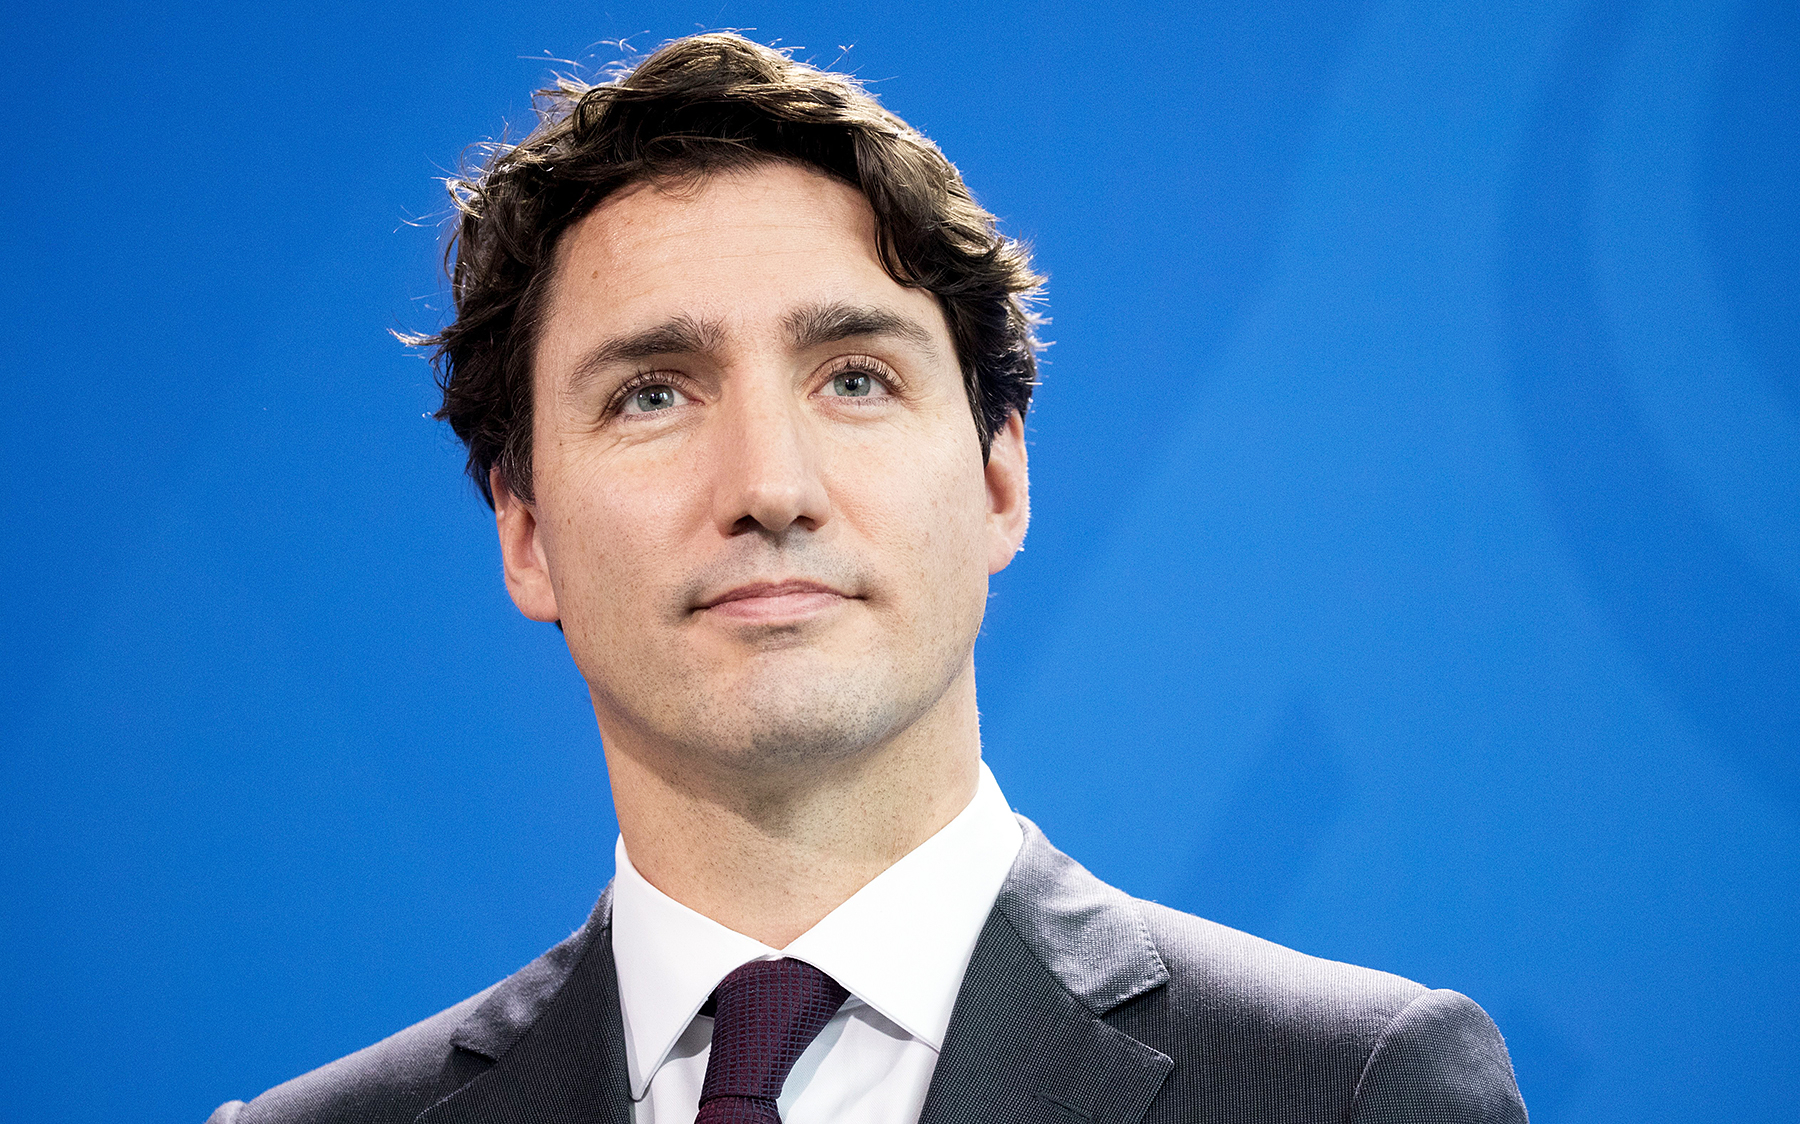 The Internet Is Going Wild for Young Justin Trudeau